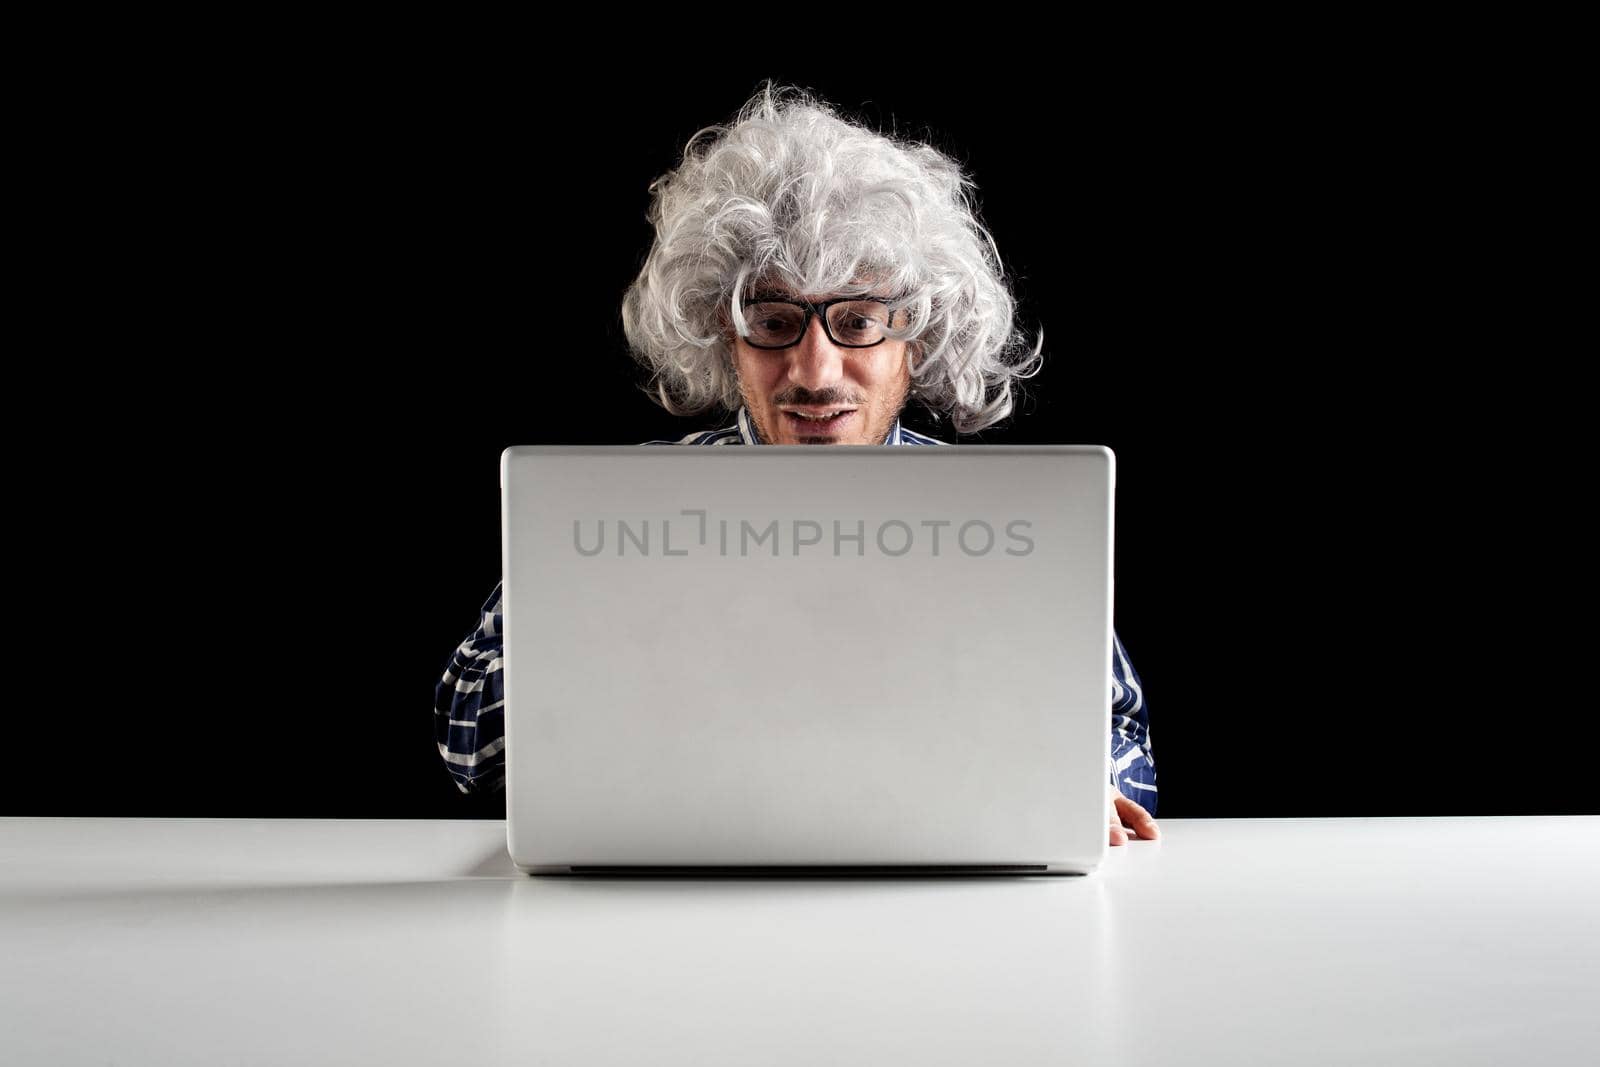 Smiling senior man with gray hair wearing a checkered shirt using laptop sit at the desk. Black background with copy space